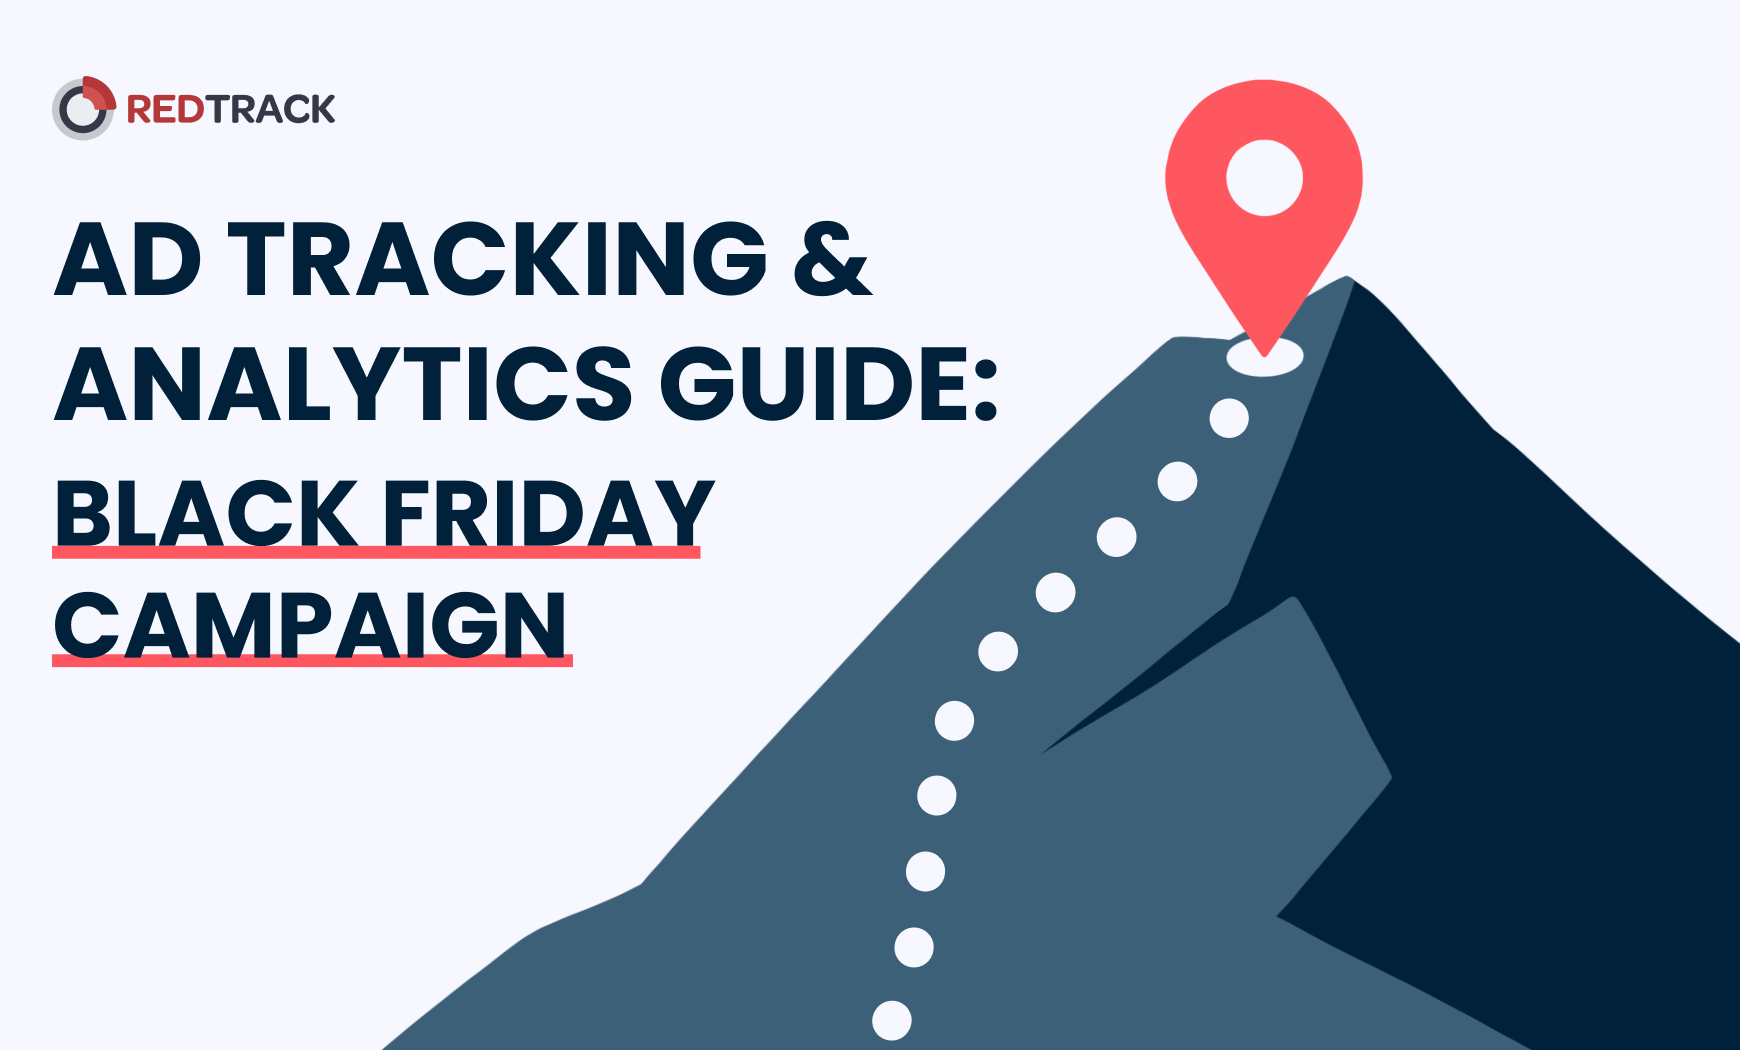 How to Prepare for Black Friday [eCommerce Edition] - RedTrack